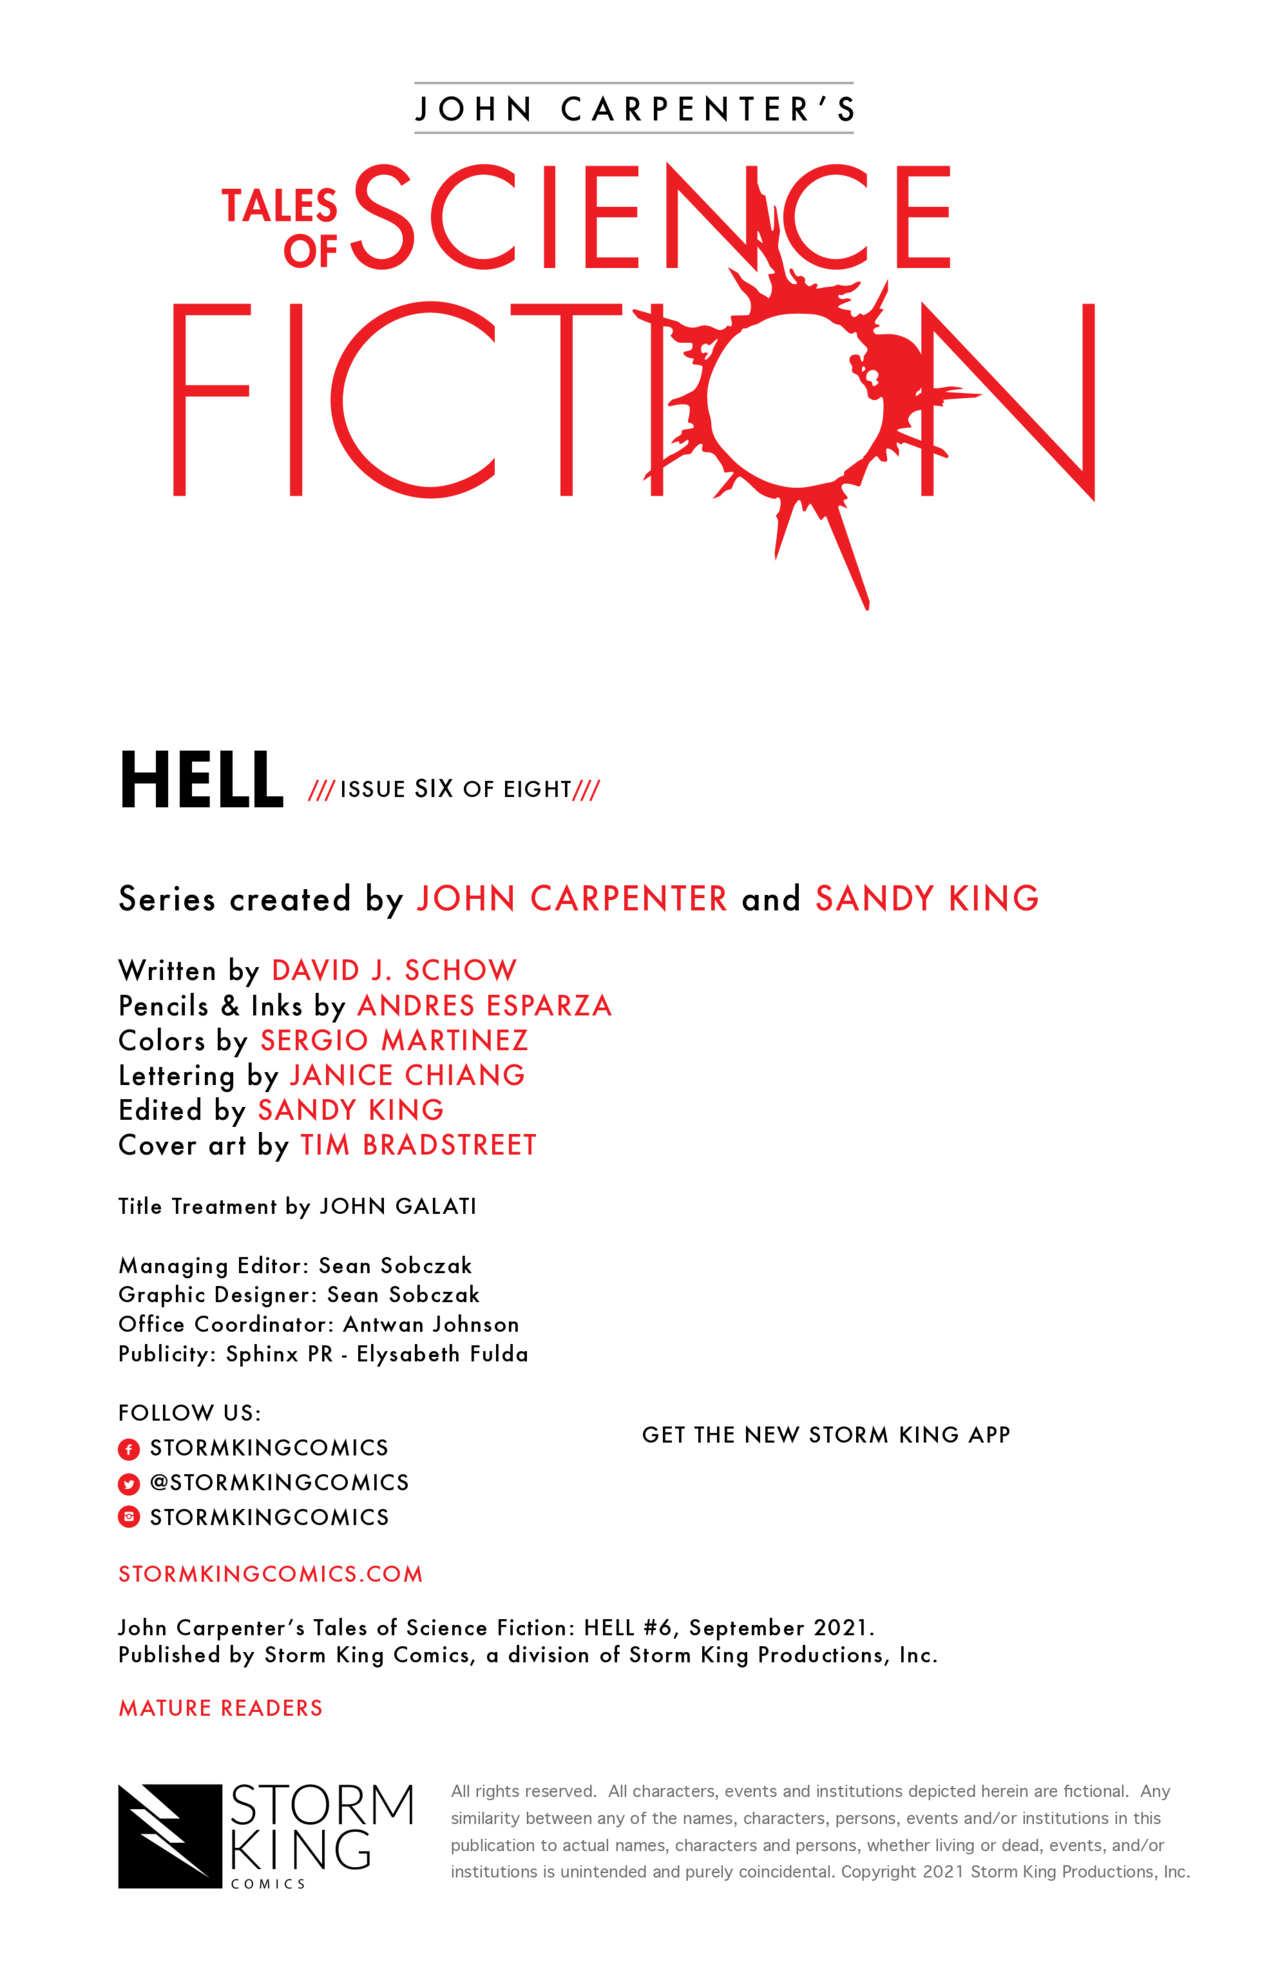 Read online John Carpenter's Tales of Science Fiction: HELL comic -  Issue #6 - 2